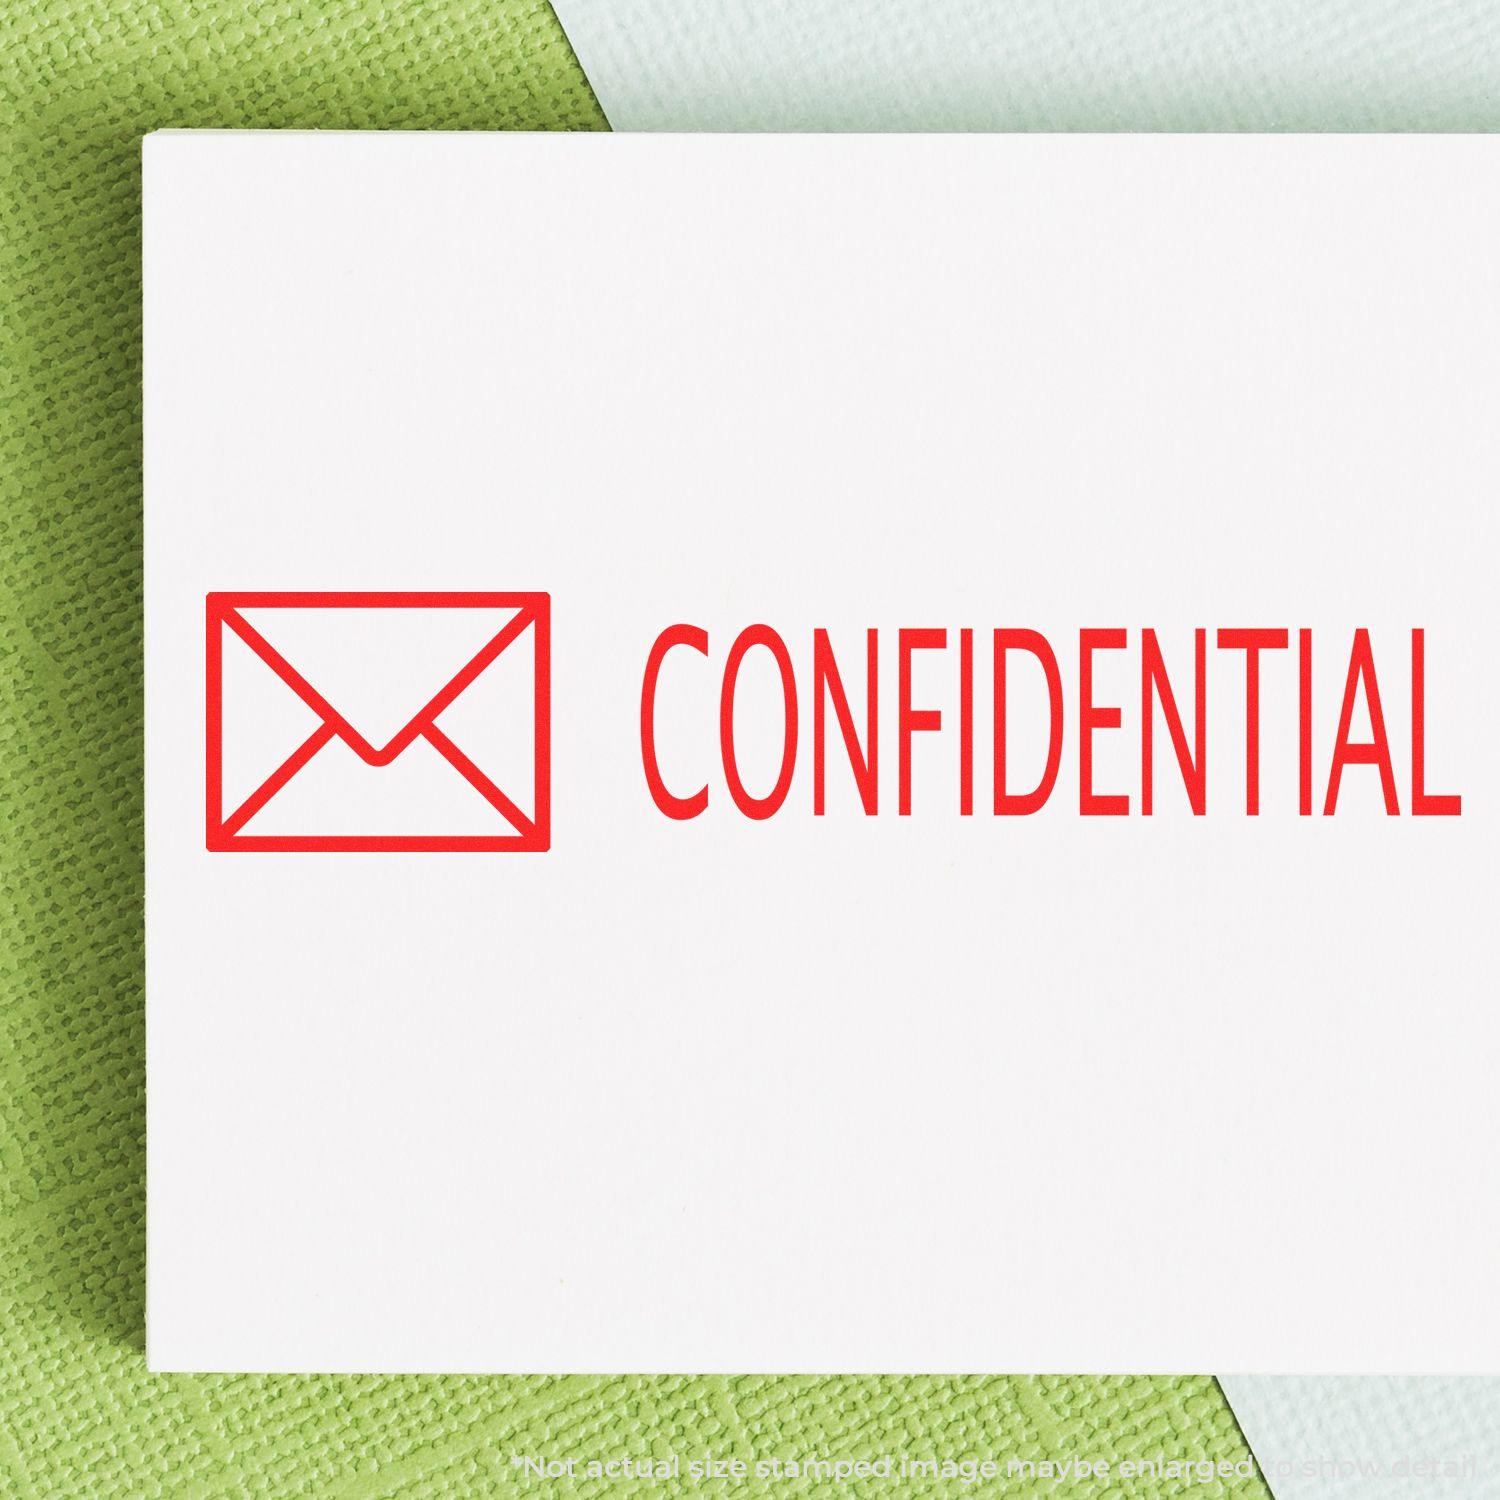 A stock office rubber stamp with a stamped image showing how the text "CONFIDENTIAL" with a small image of an envelope on the left side is displayed after stamping.